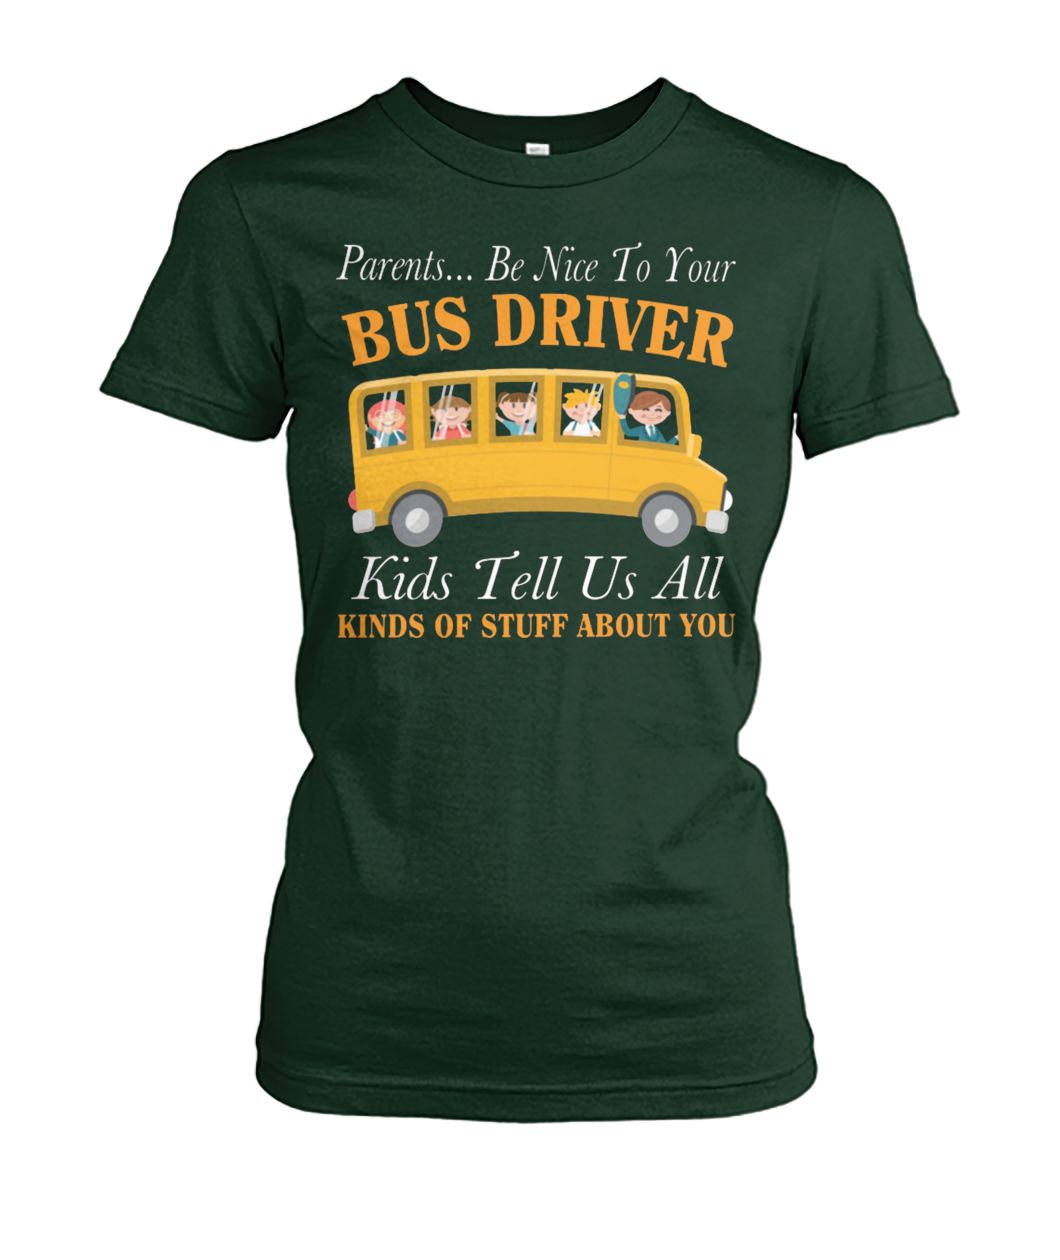 Parents be nice to your bus driver kids tell us all kinds of stuff about you women's crew tee